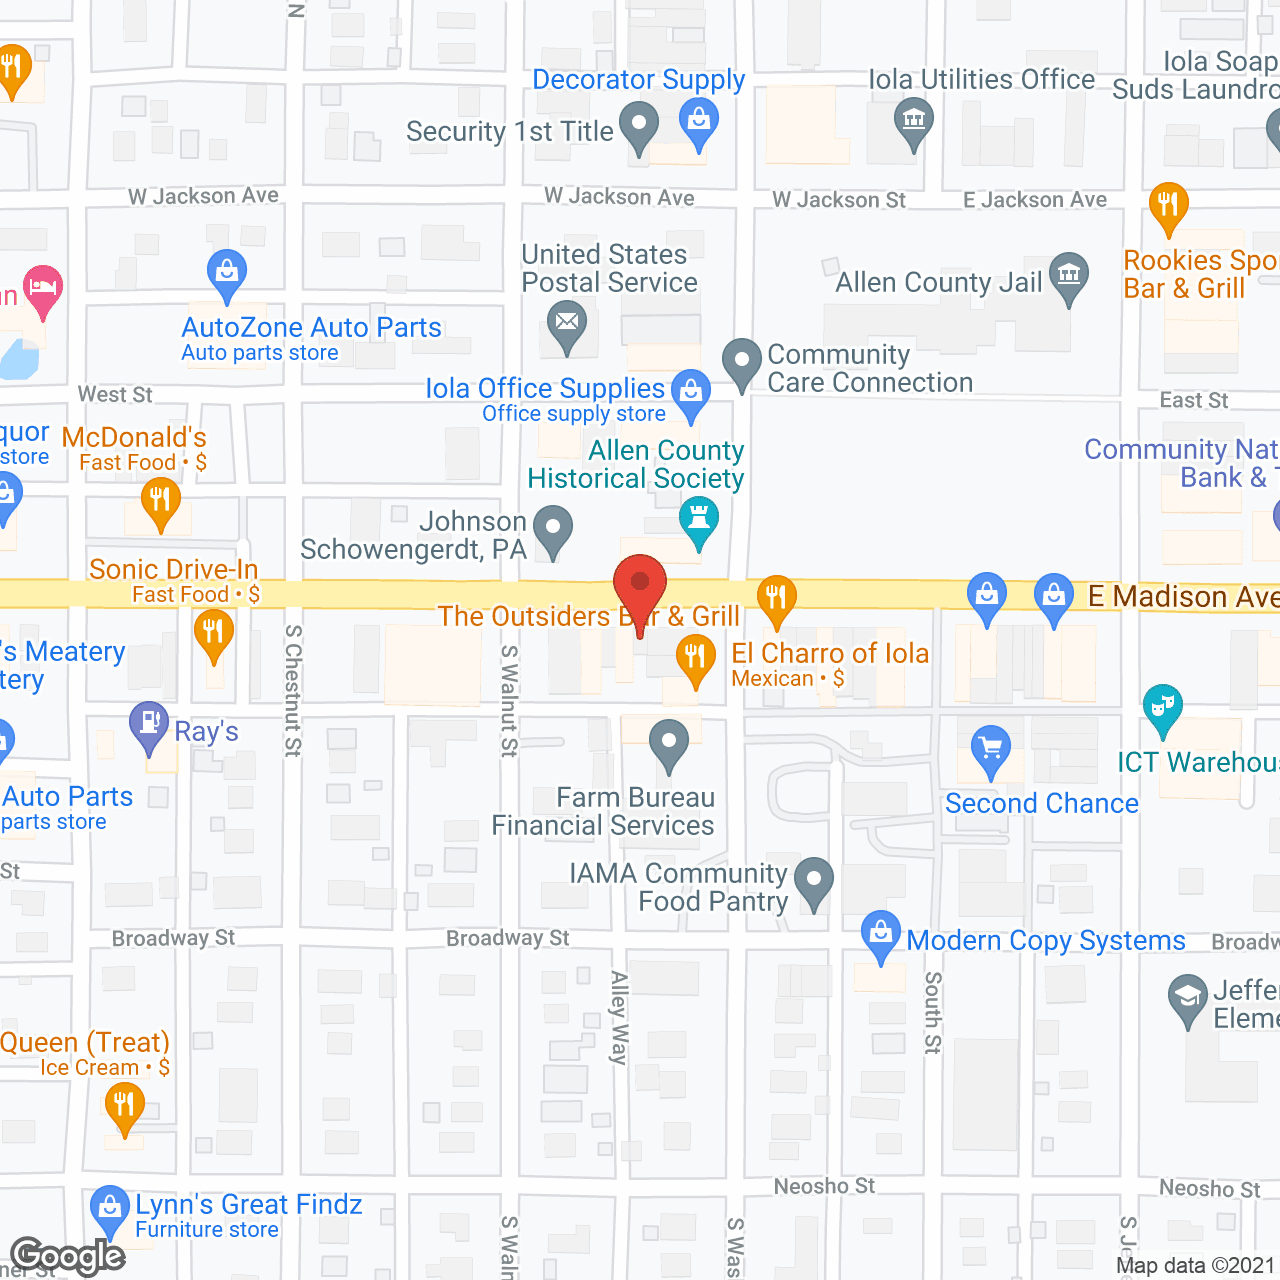 Community Care Connections in google map